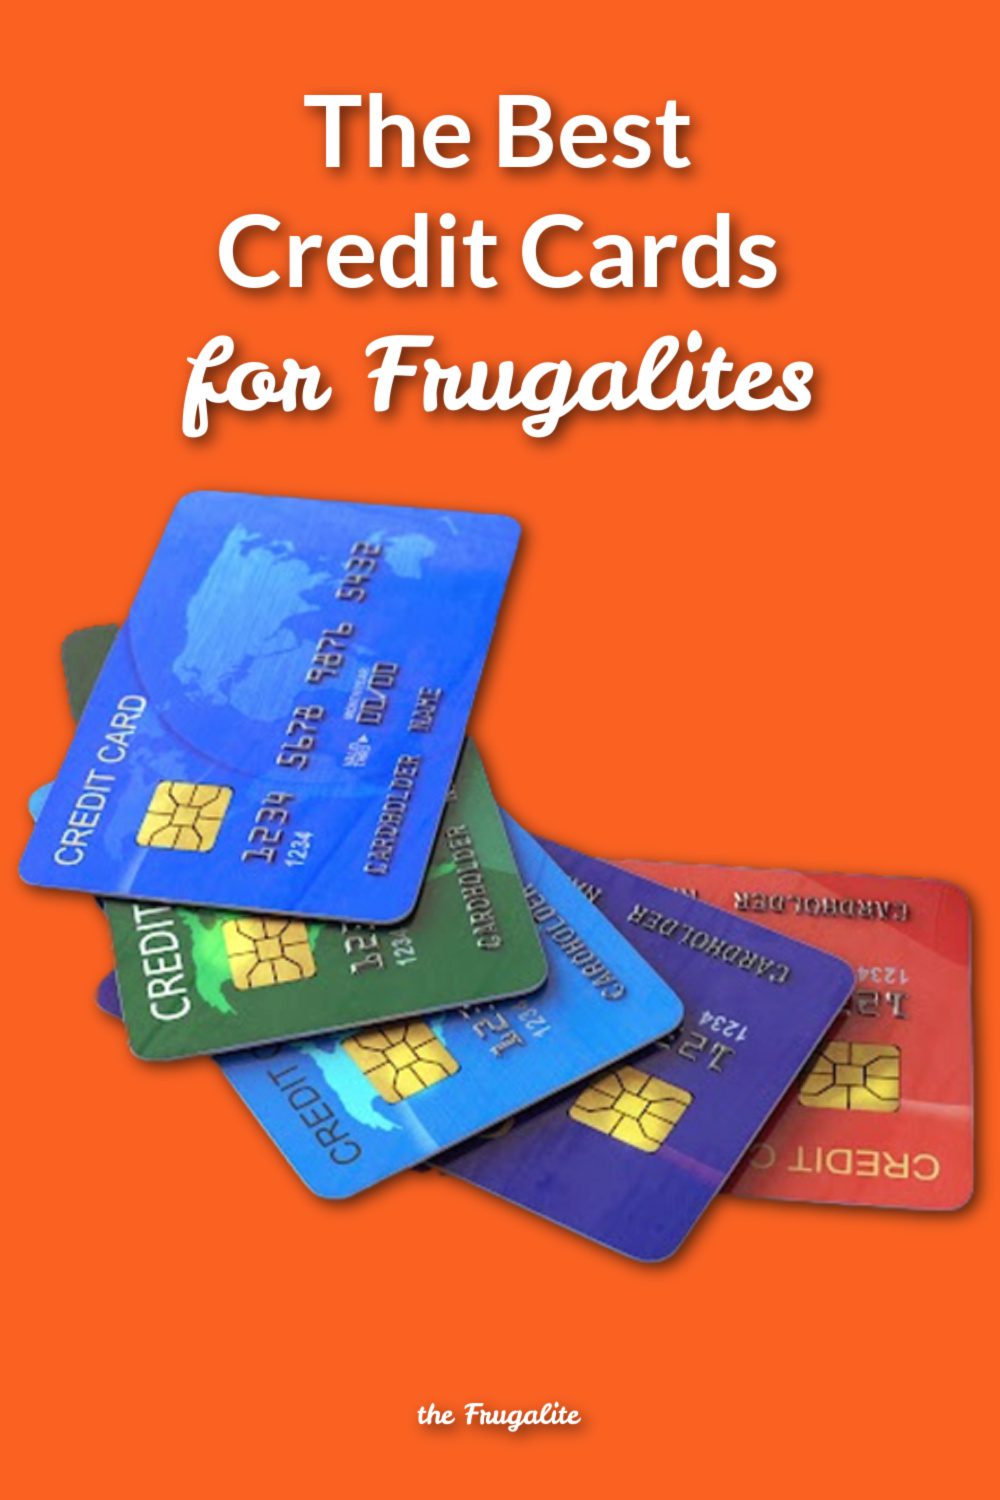 The Best Credit Cards for Frugalites